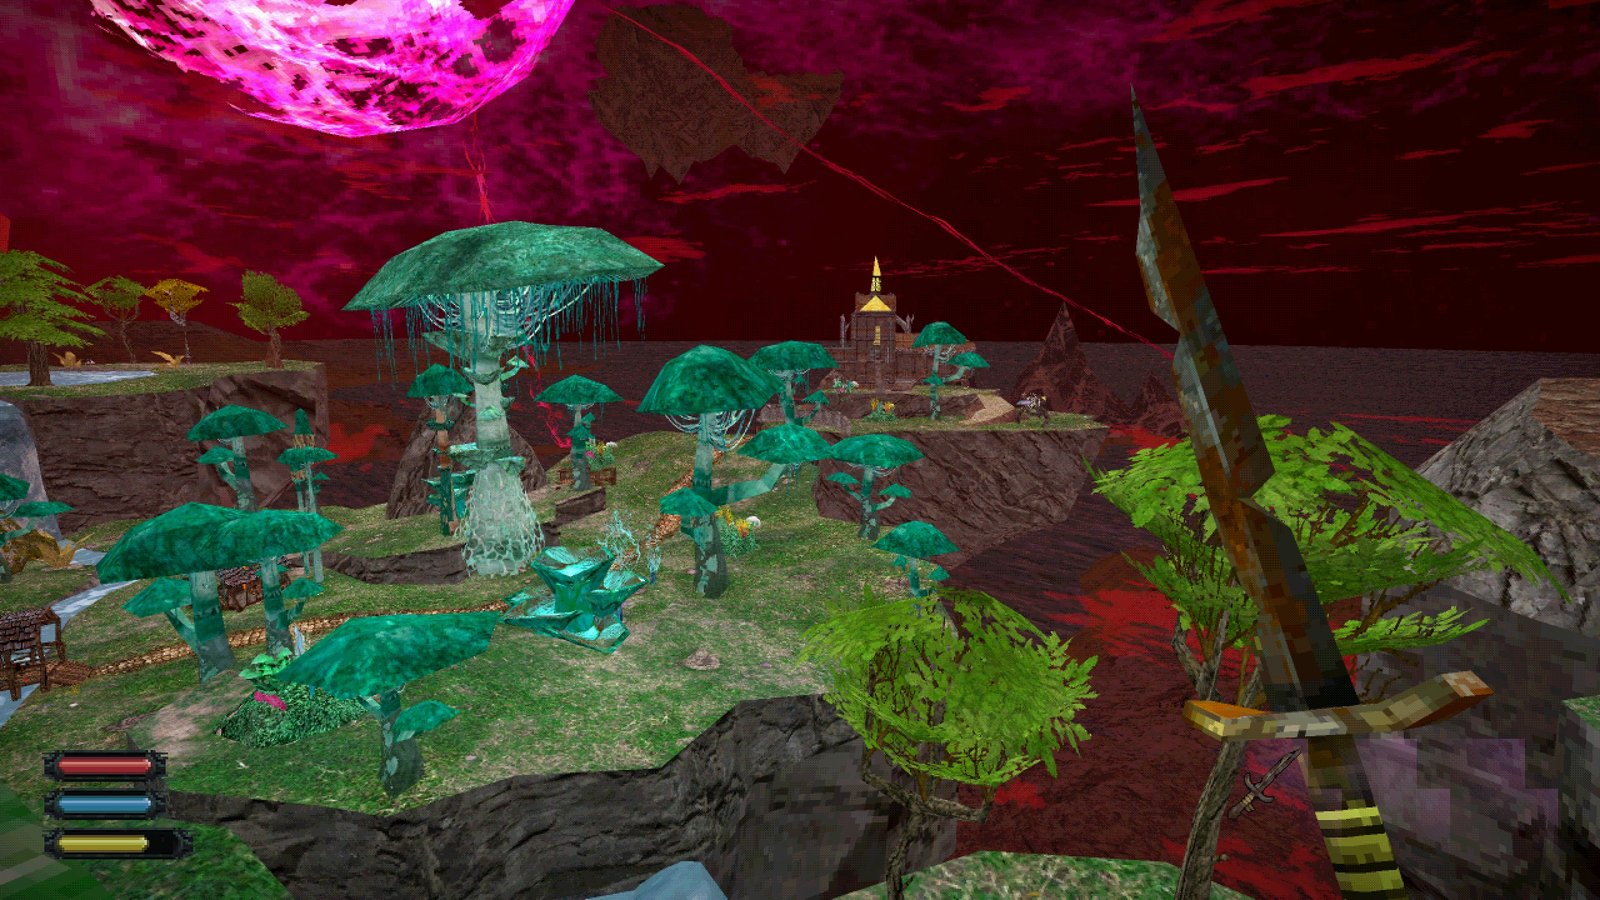 view of alien landscape with teal mushrooms in dread delusion